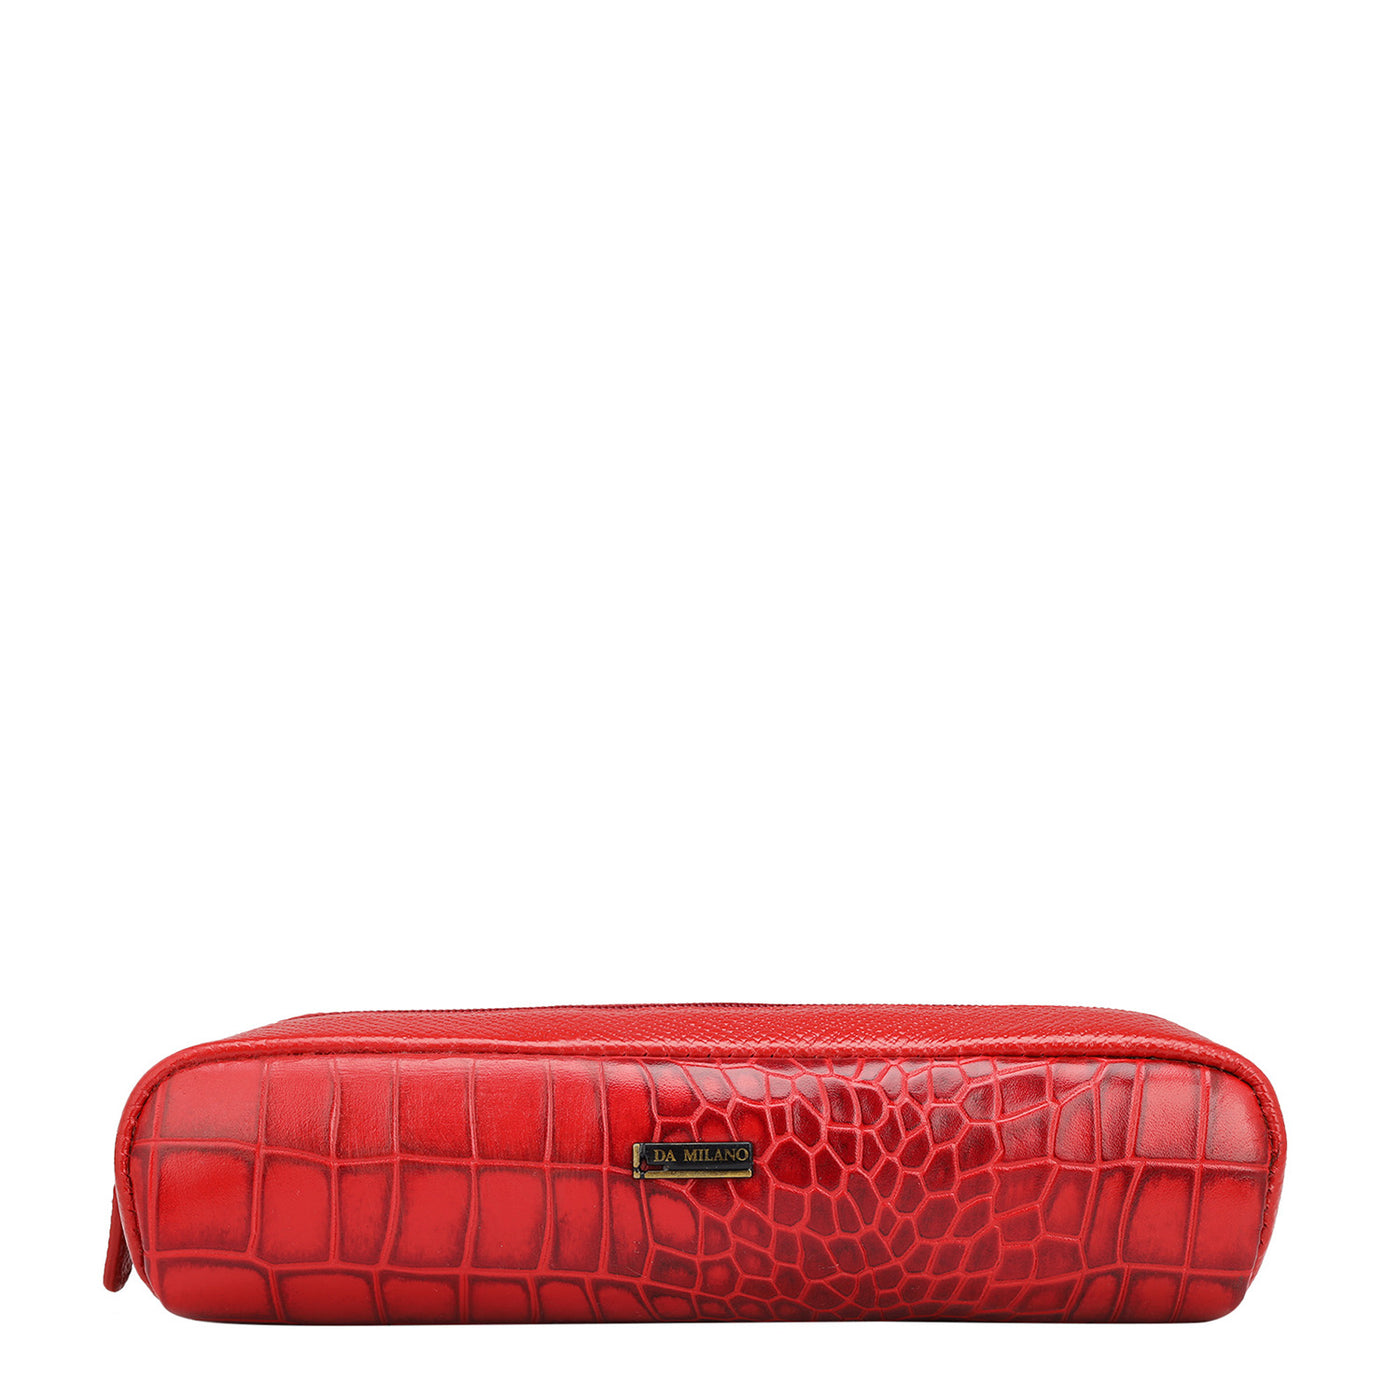 Croco Franzy Leather Multi Pouch - Red